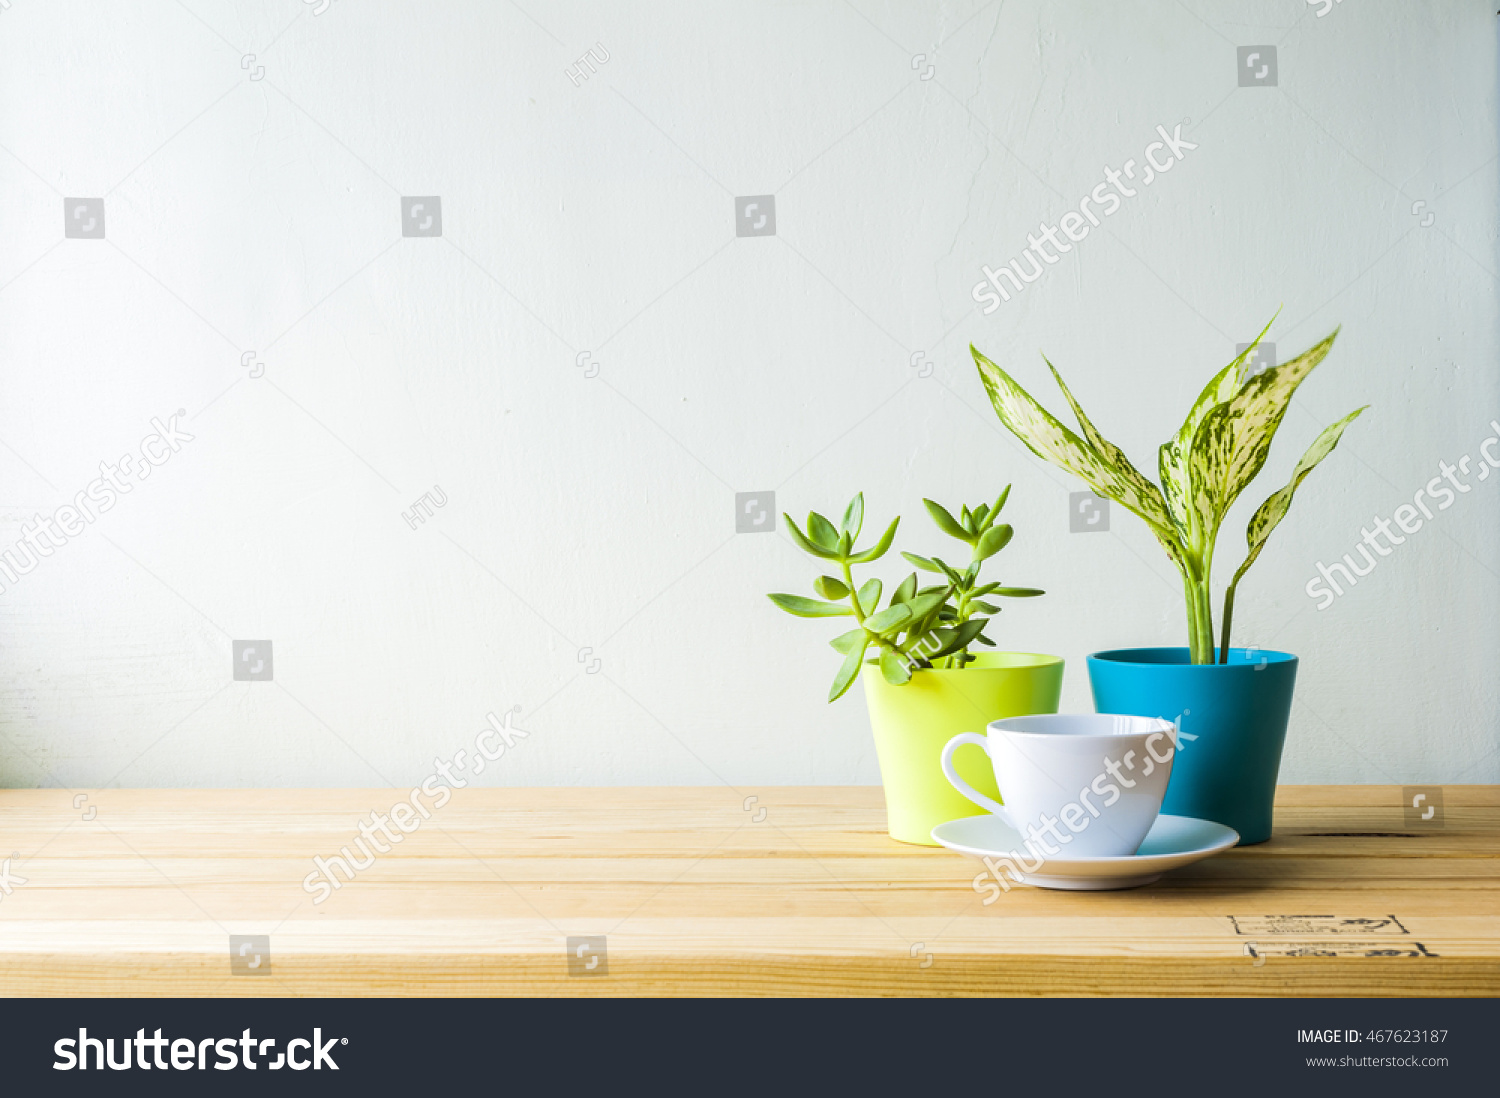 Indoor plant on wooden table and white wall #467623187